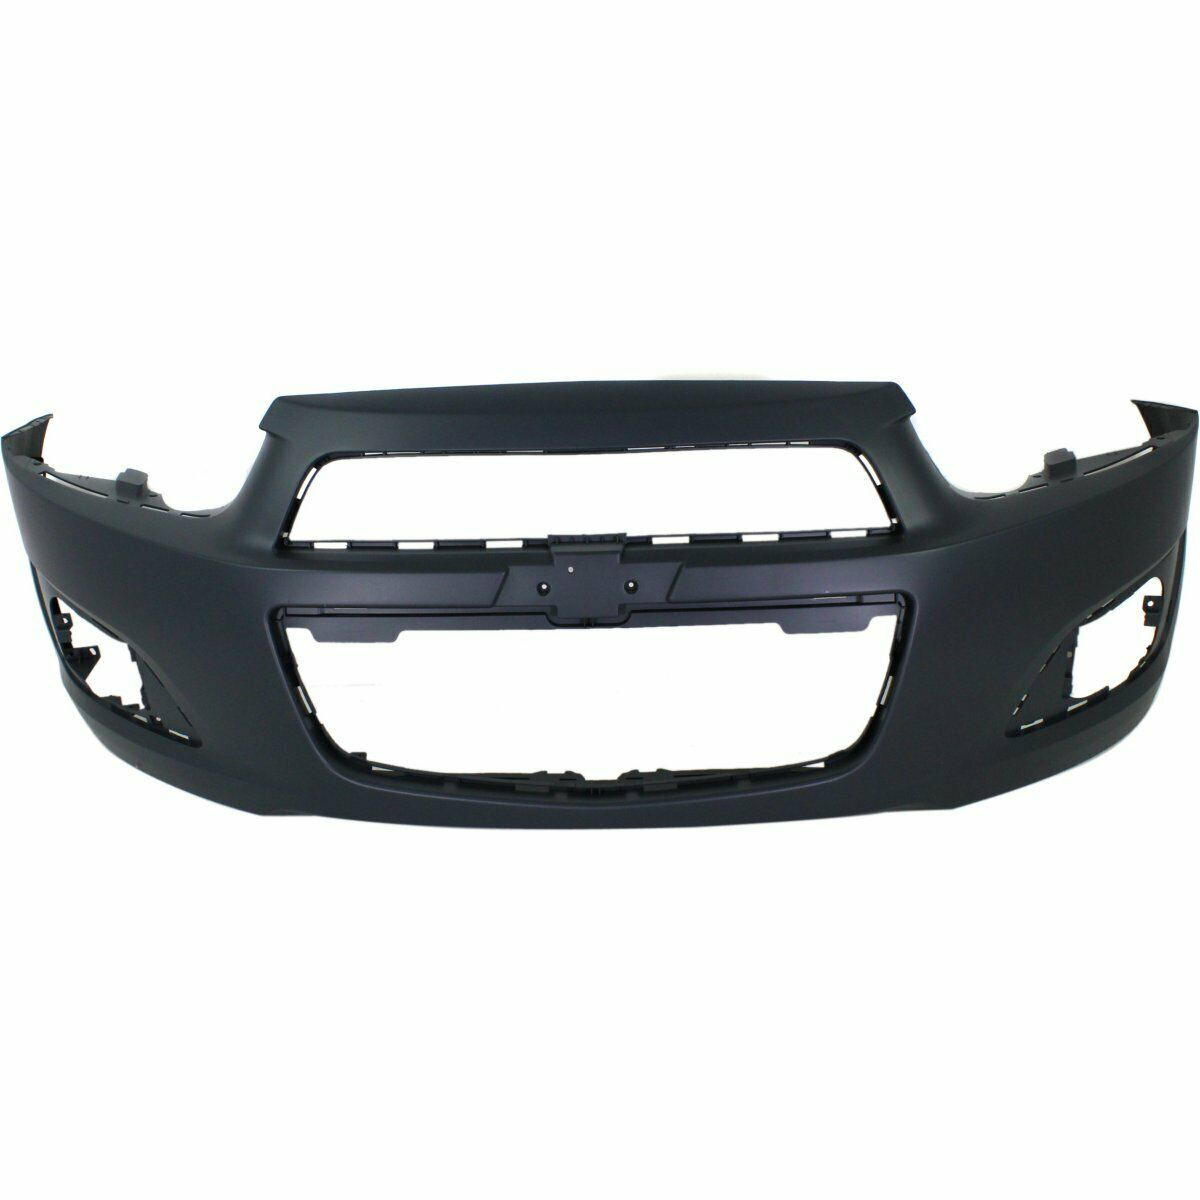 2012-2016 CHEVY SONIC HB Front Bumper Painted to Match